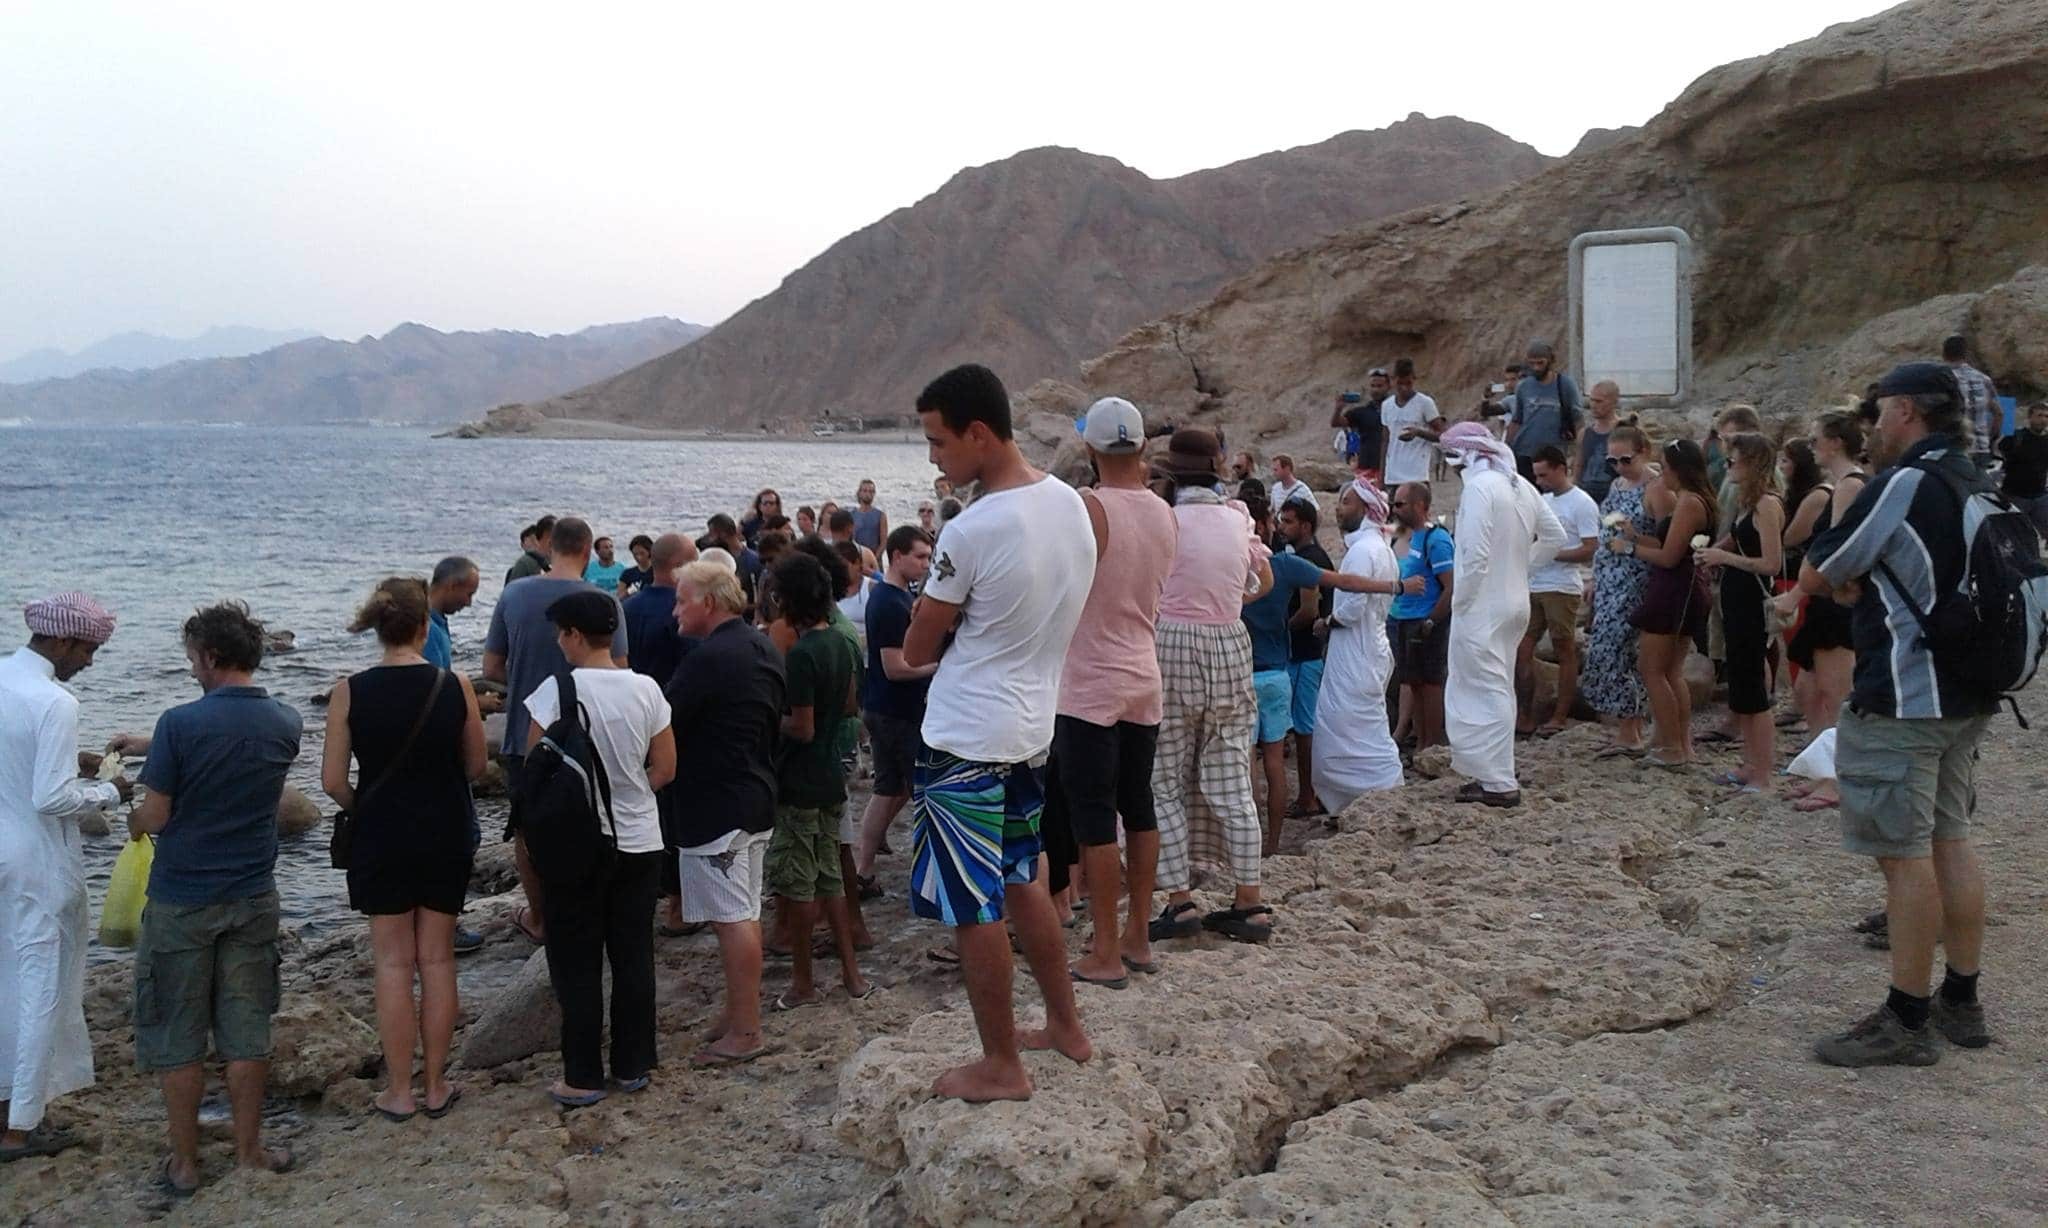 A memorial gathering at the Blue Hole in Dahab to pay tribute to Stephen Keenan. (photo by Olivier Server)